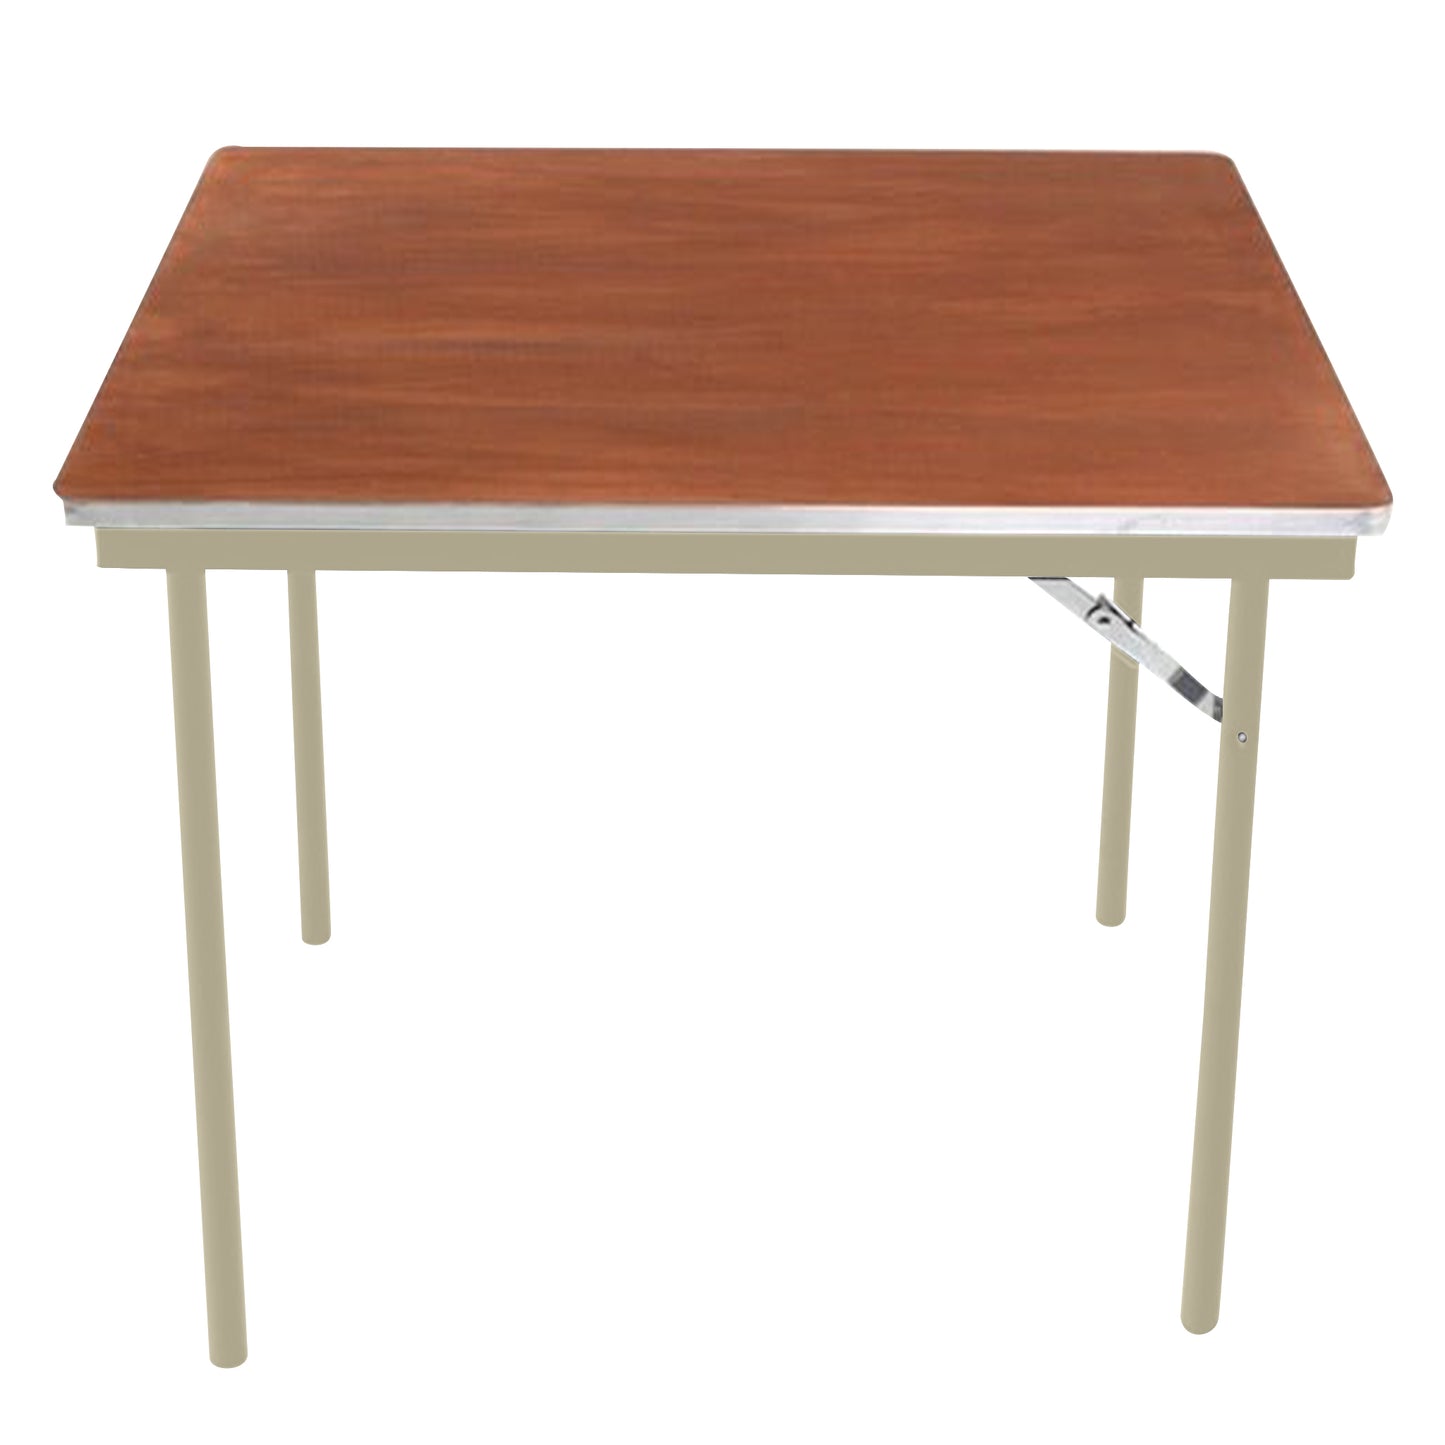 AmTab Folding Table - Plywood Stained and Sealed - Aluminum Edge - Square - 36"W x 36"L x 29"H  (AmTab AMT-SQ36PA)